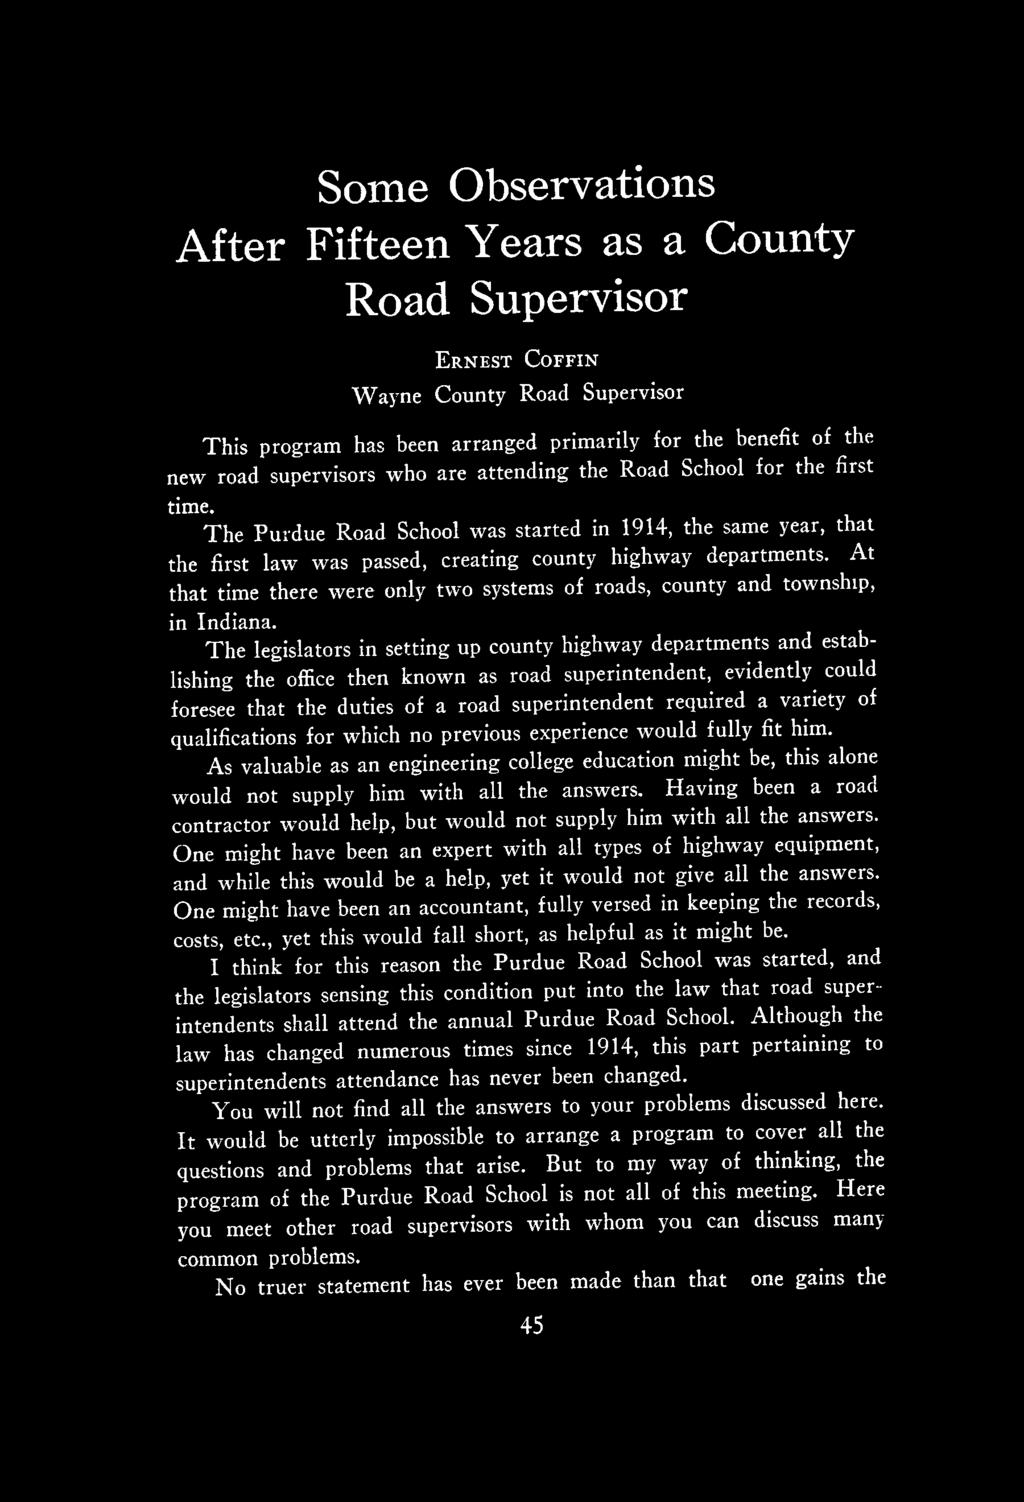 At that time there were only two systems of roads, county and township, in Indiana.